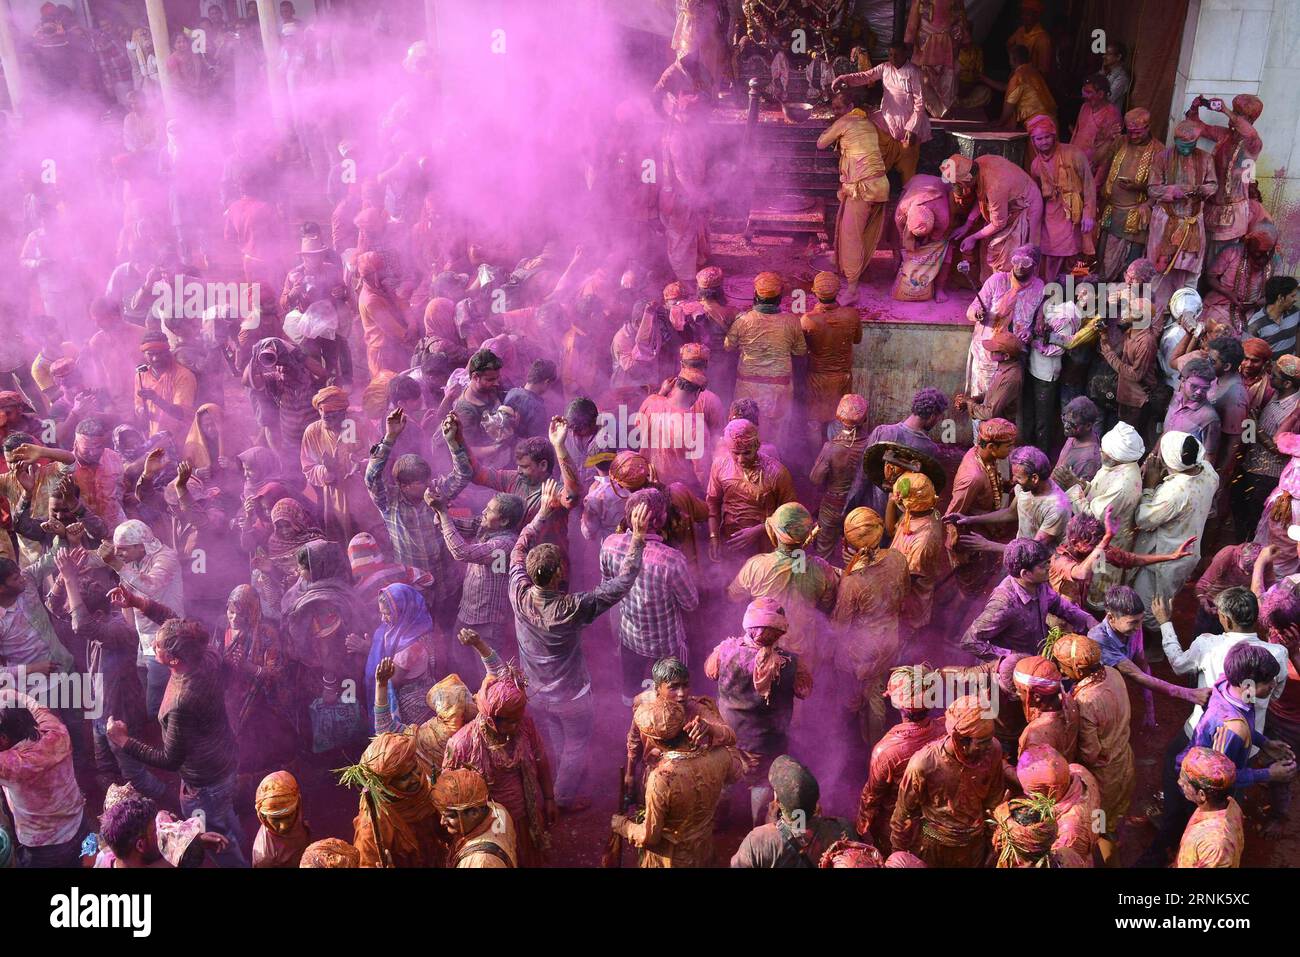 (170307) -- MATHURA, March 7, 2017 -- Villagers daubed with color powder celebrate Lath Mar Holi in Mathura, northern Indian state of Uttar Pradesh, on March 7, 2017. Lath Mar Holi is a local annual festival celebrated in neighbouring towns near Mathura, as part of the yearly grand Holi festival. It takes place a couple of days ahead of the actual Holi day. ) INDIA-MATHURA-LATH MAR HOLI-CELEBRATION Stringer PUBLICATIONxNOTxINxCHN   Mathura March 7 2017 Villagers daubed With Color Powder Celebrate lath Mar Holi in Mathura Northern Indian State of Uttar Pradesh ON March 7 2017 lath Mar Holi IS a Stock Photo